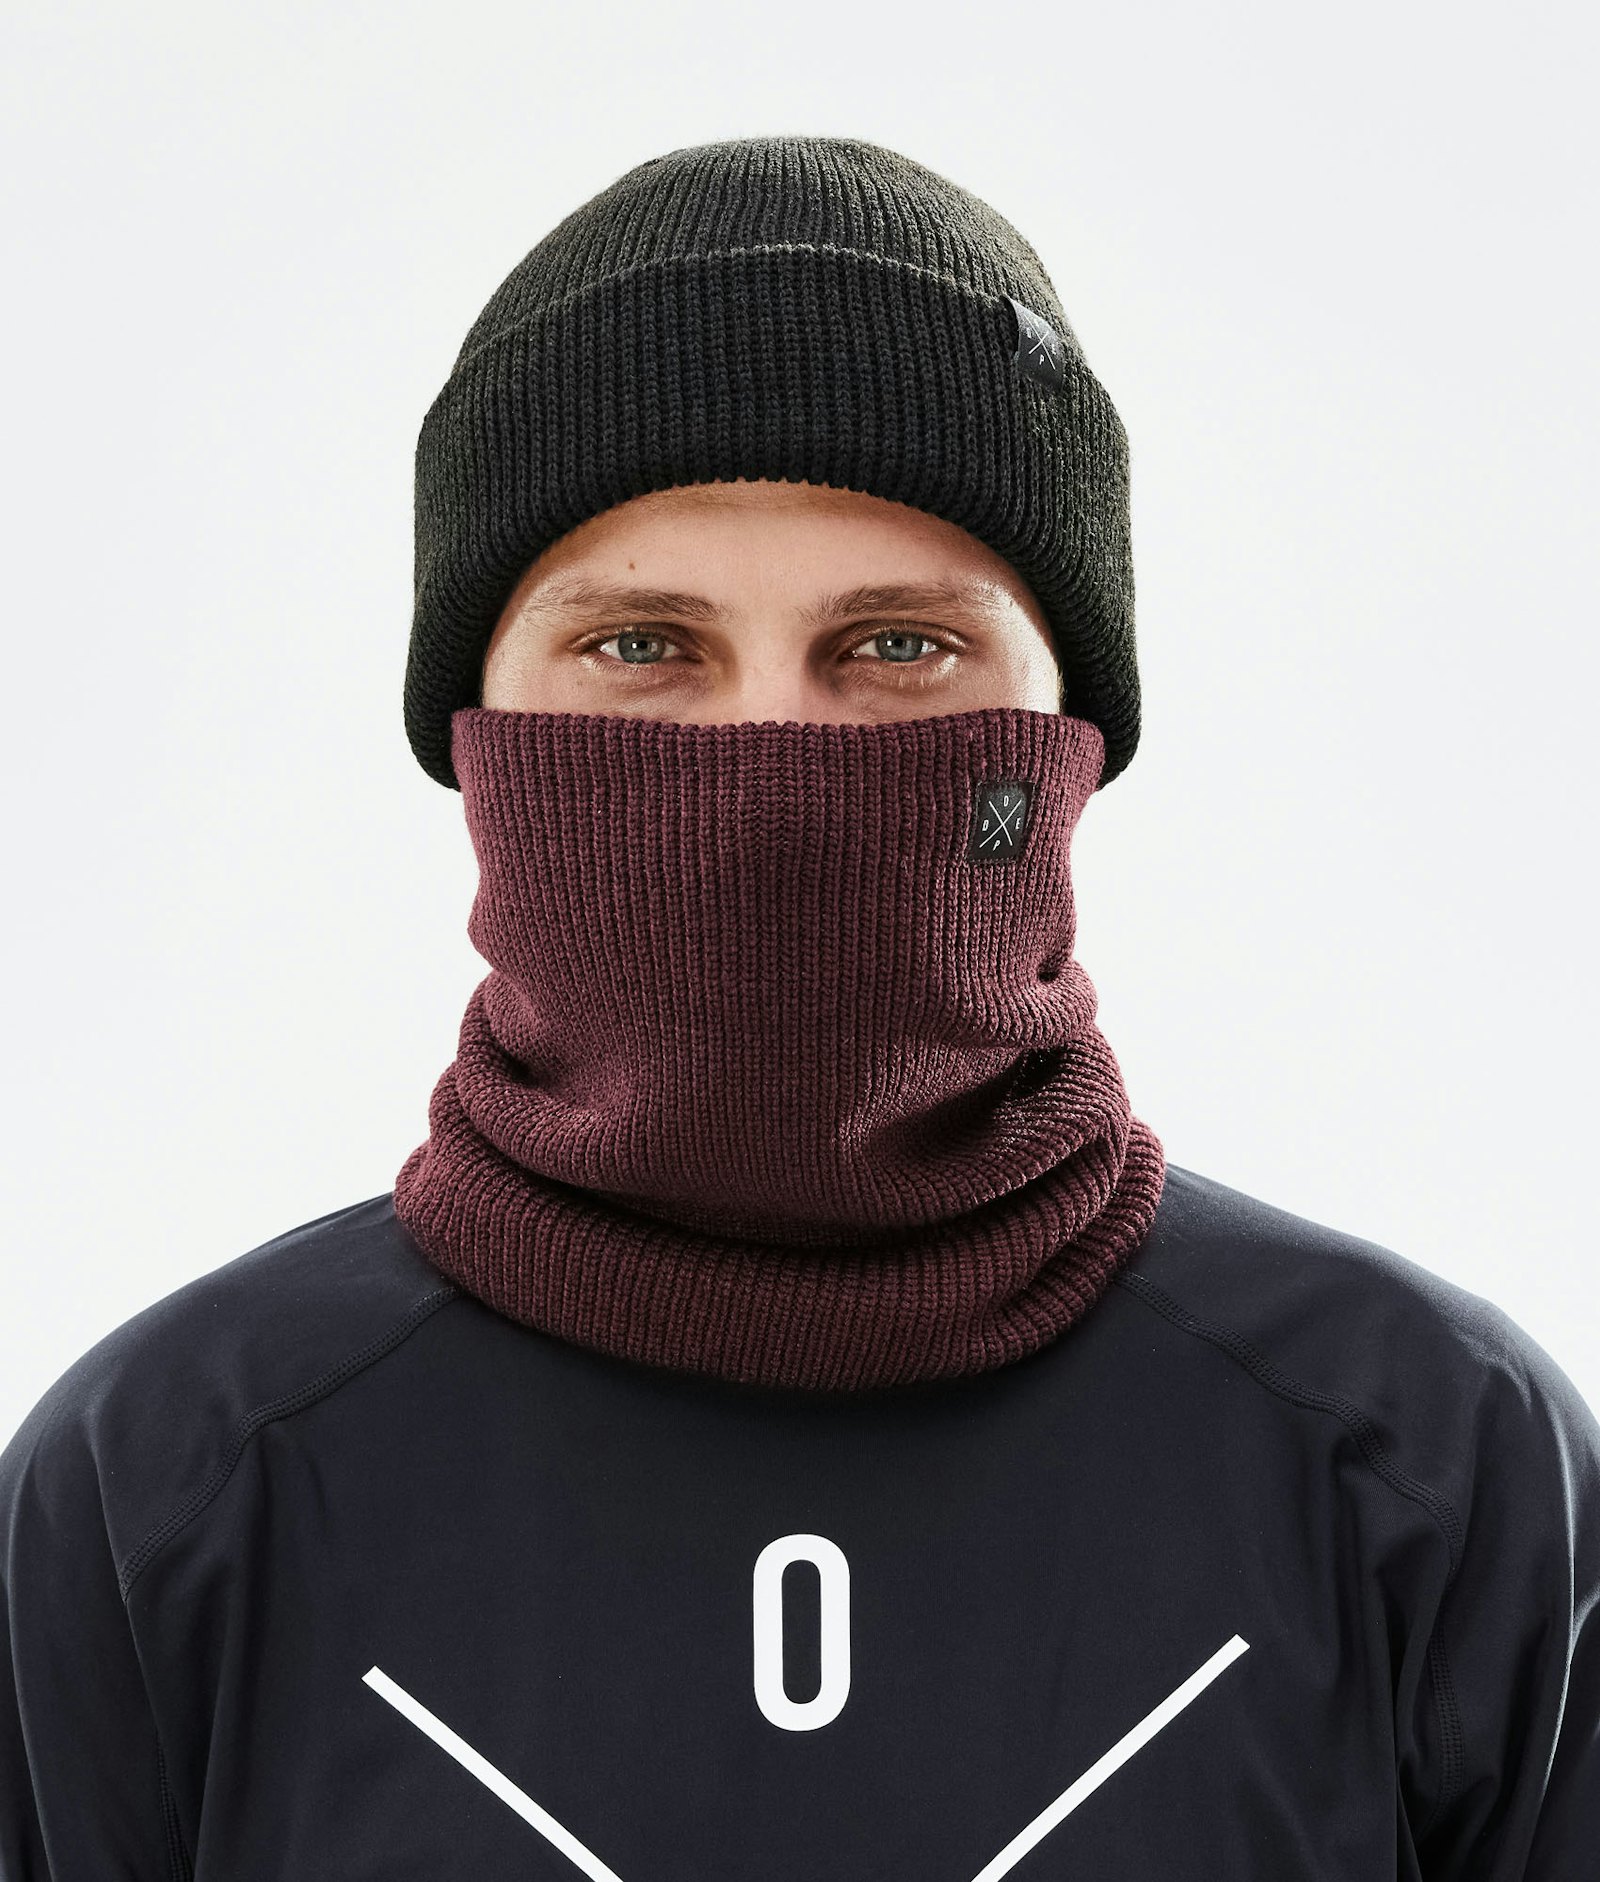 Dope 2X-UP Knitted Tour de cou Burgundy